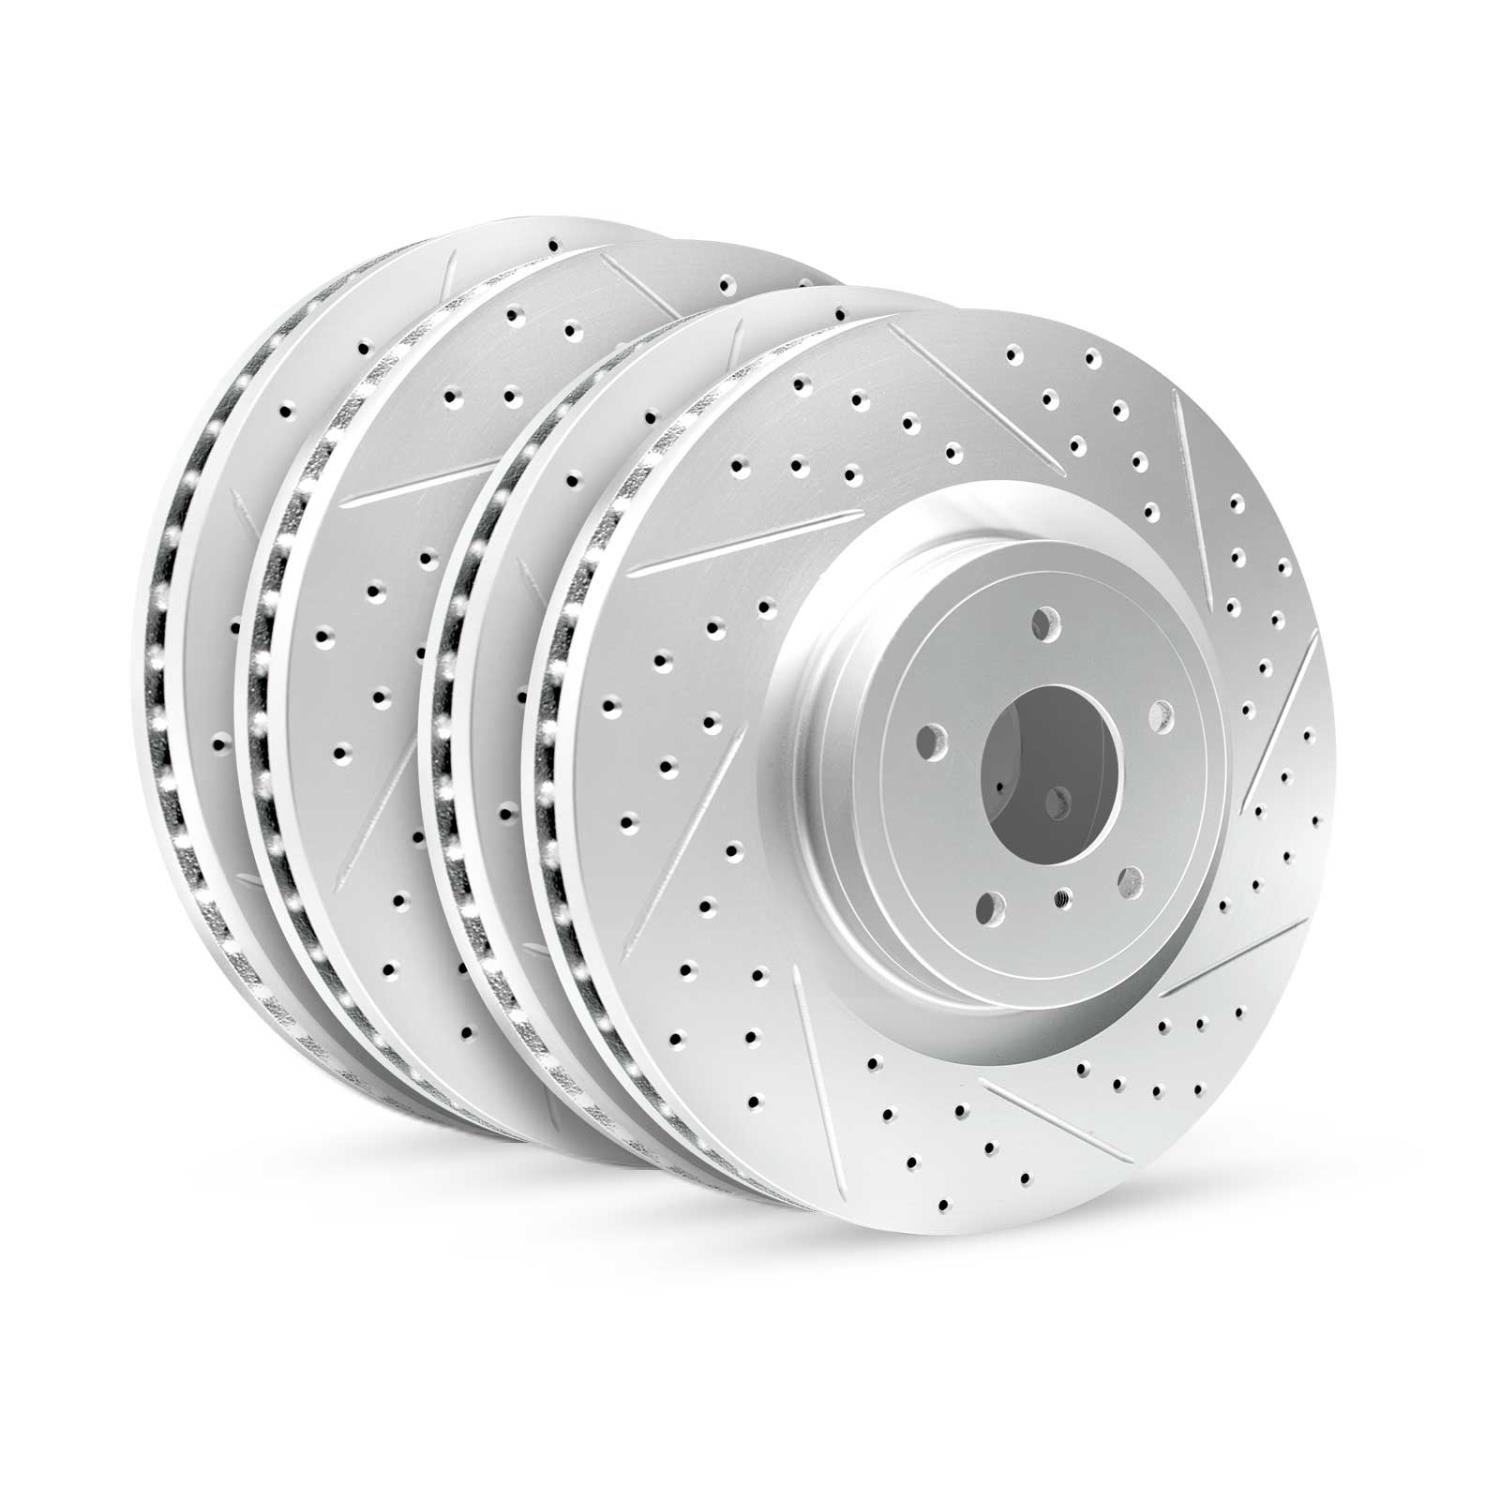 GEO-Carbon Drilled/Slotted Rotors, 2012-2017 Kia/Hyundai/Genesis, Position: Front/Rear